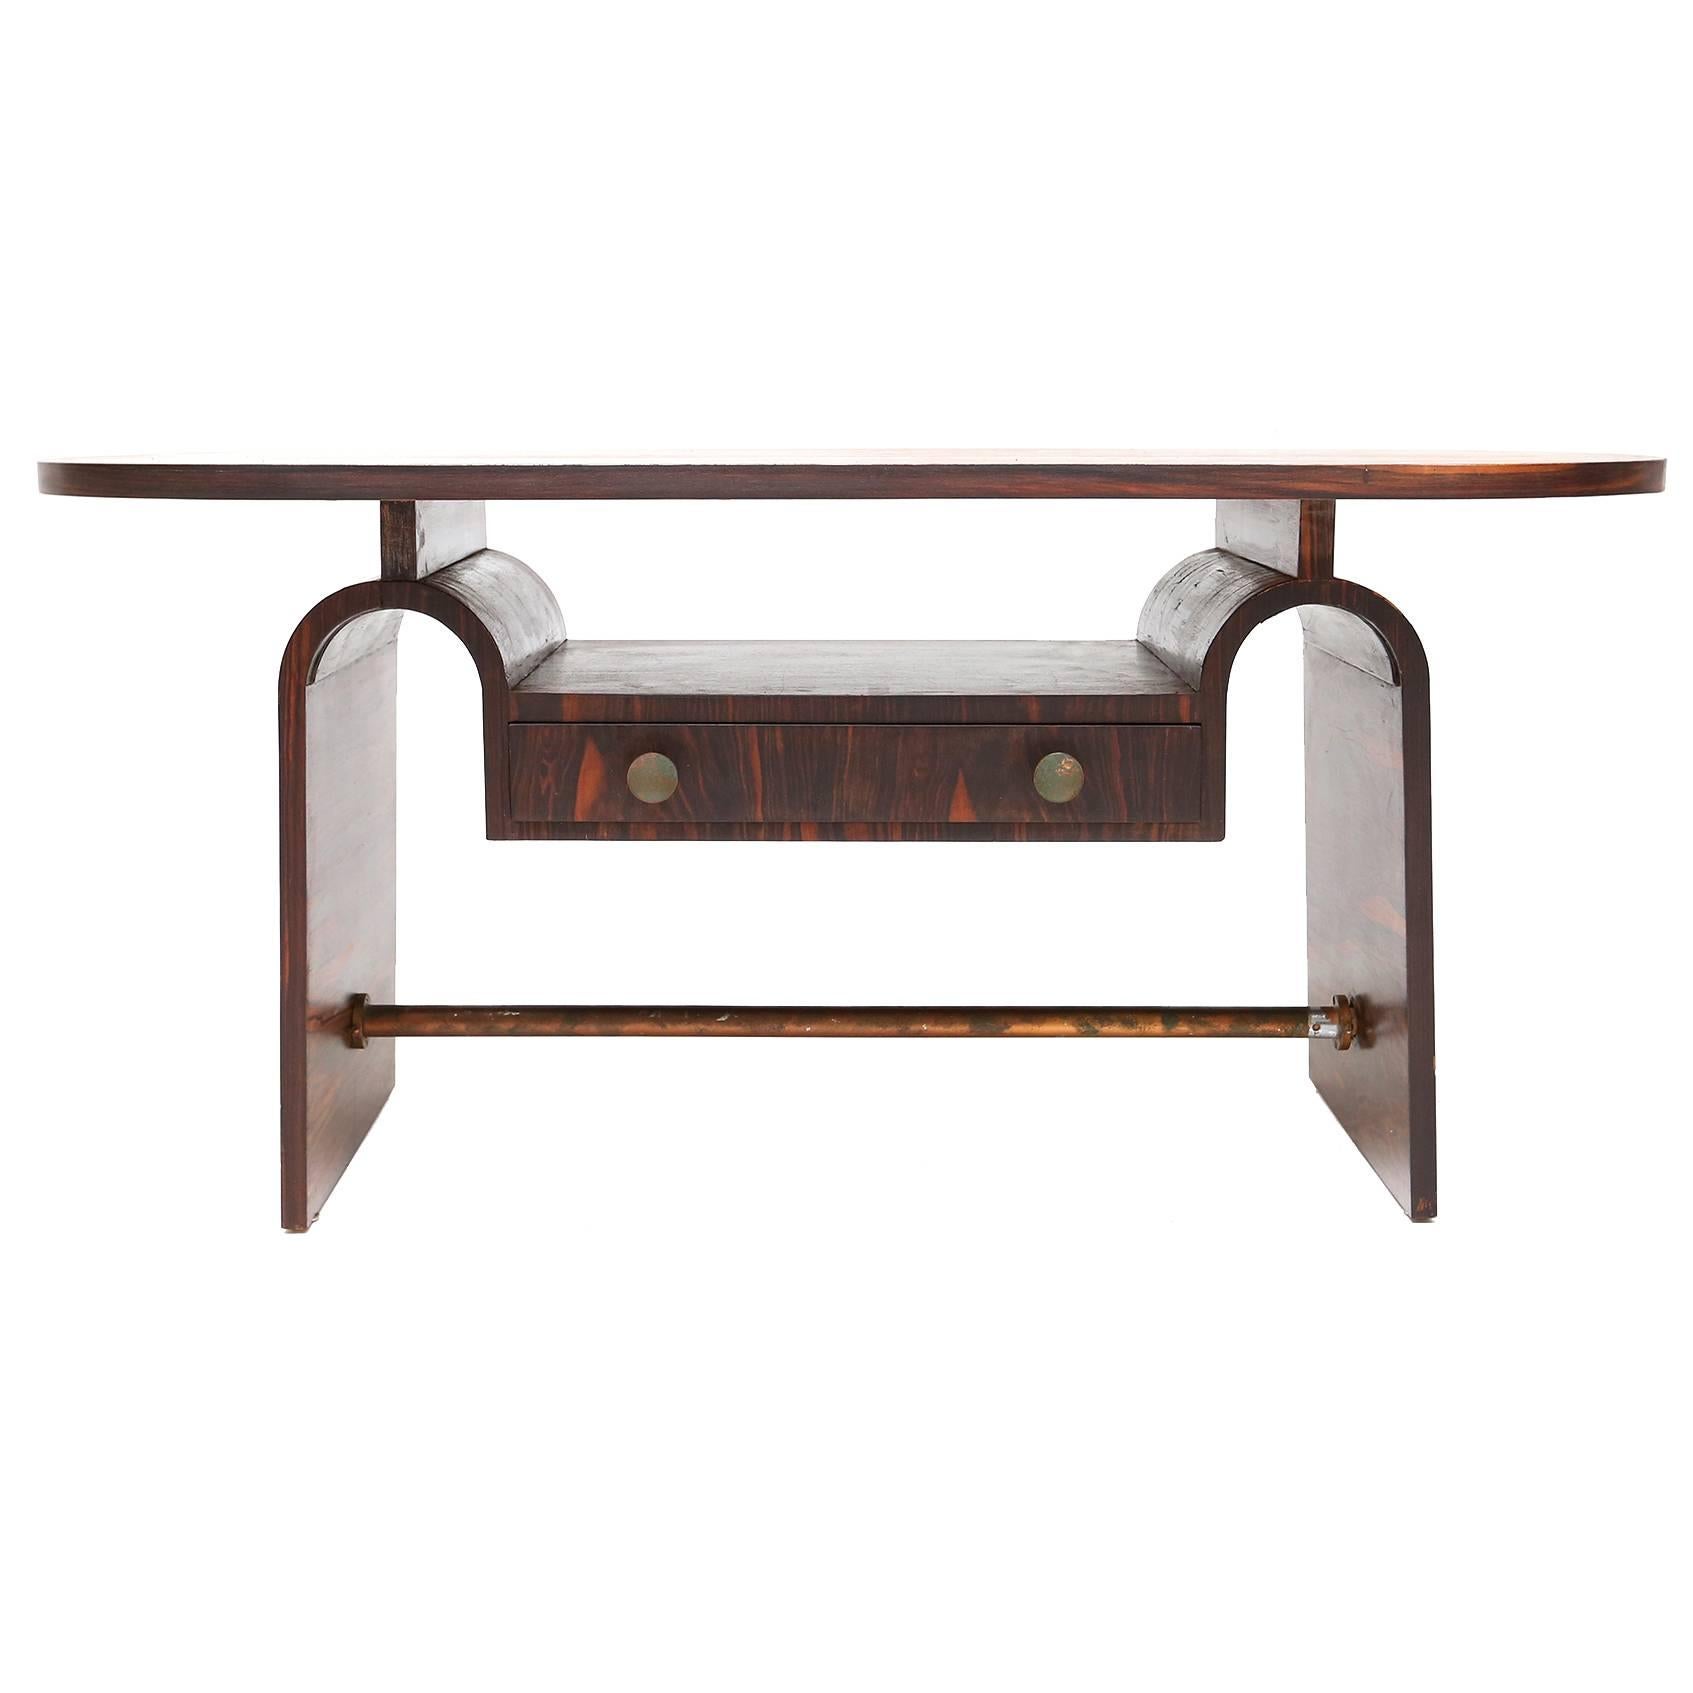 Macassar Table by Mesquita for Metz & Co